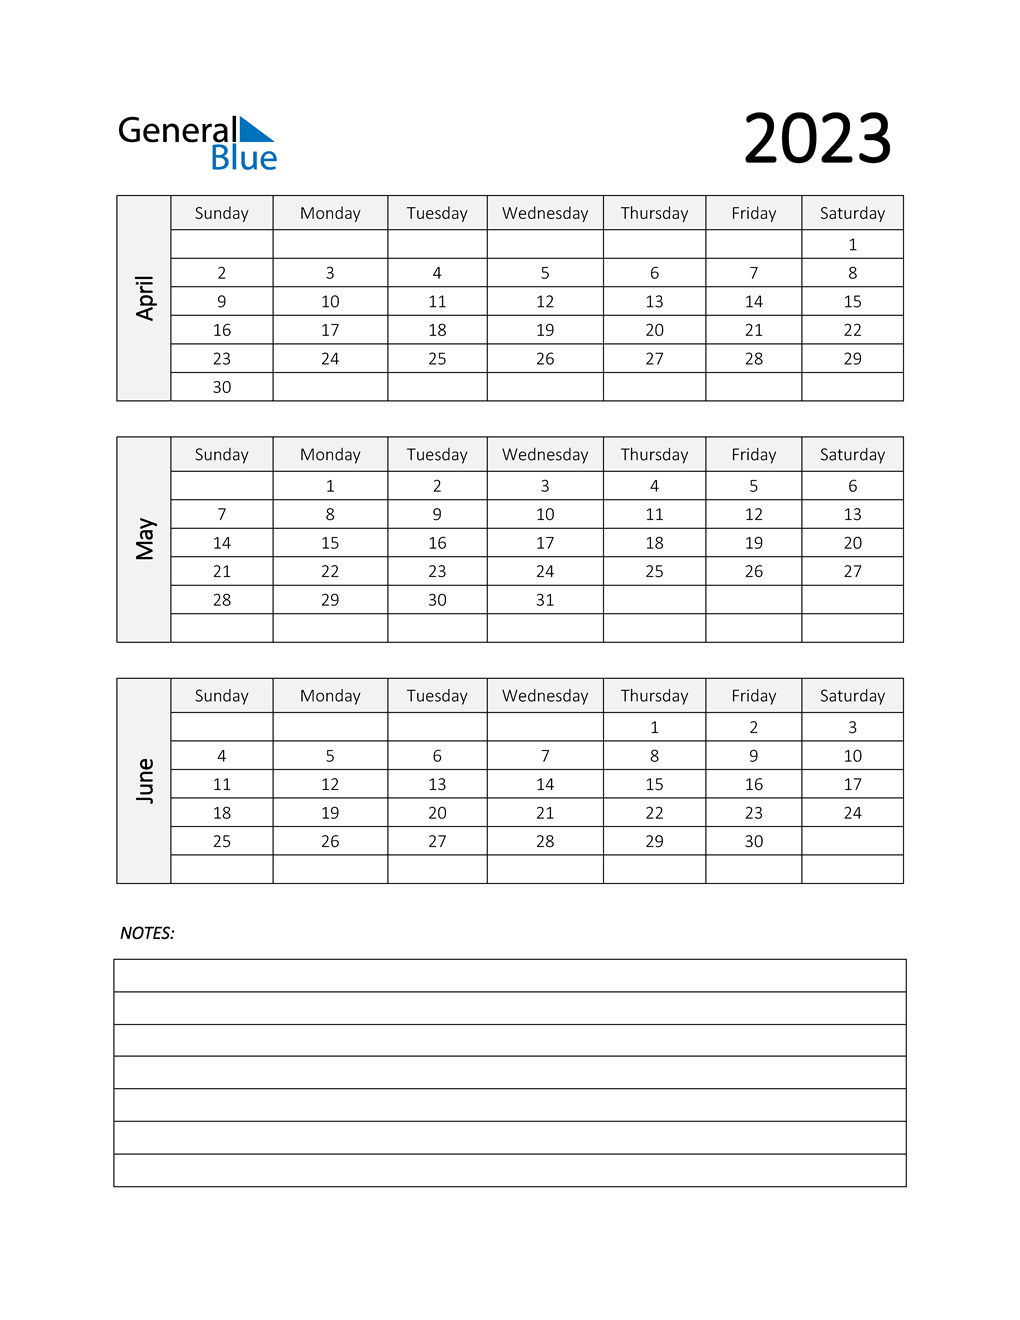  Q2 2023 Calendar with Notes